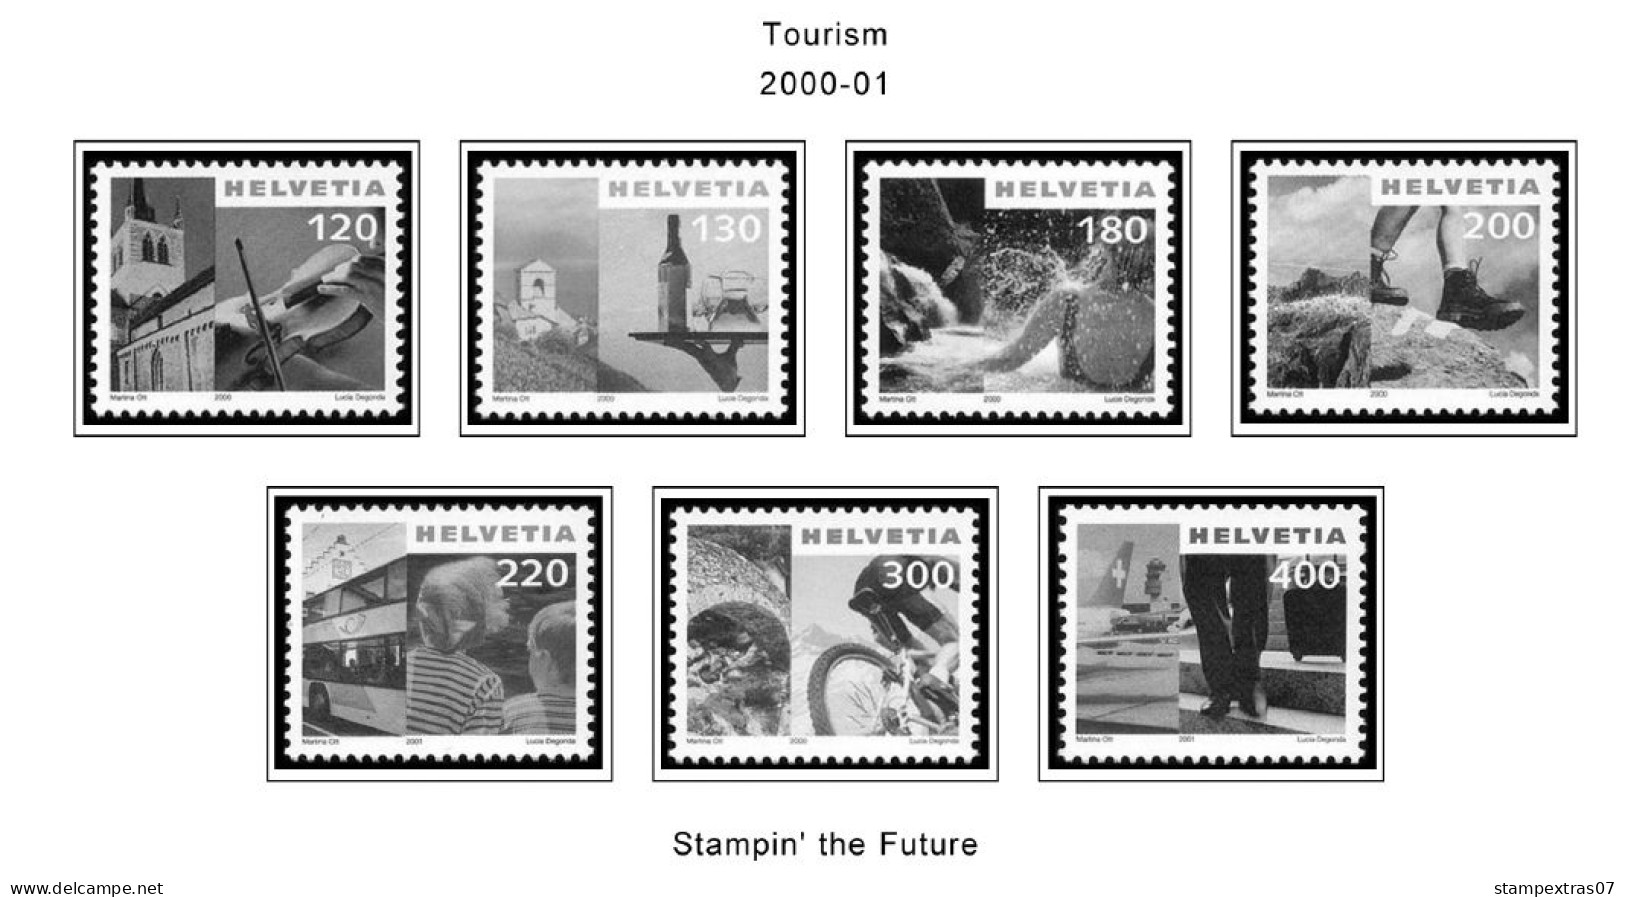 SWITZERLAND 1843-2010 + 2011-2020 STAMP ALBUM PAGES (277 B&w Illustrated Pages) - Inglese